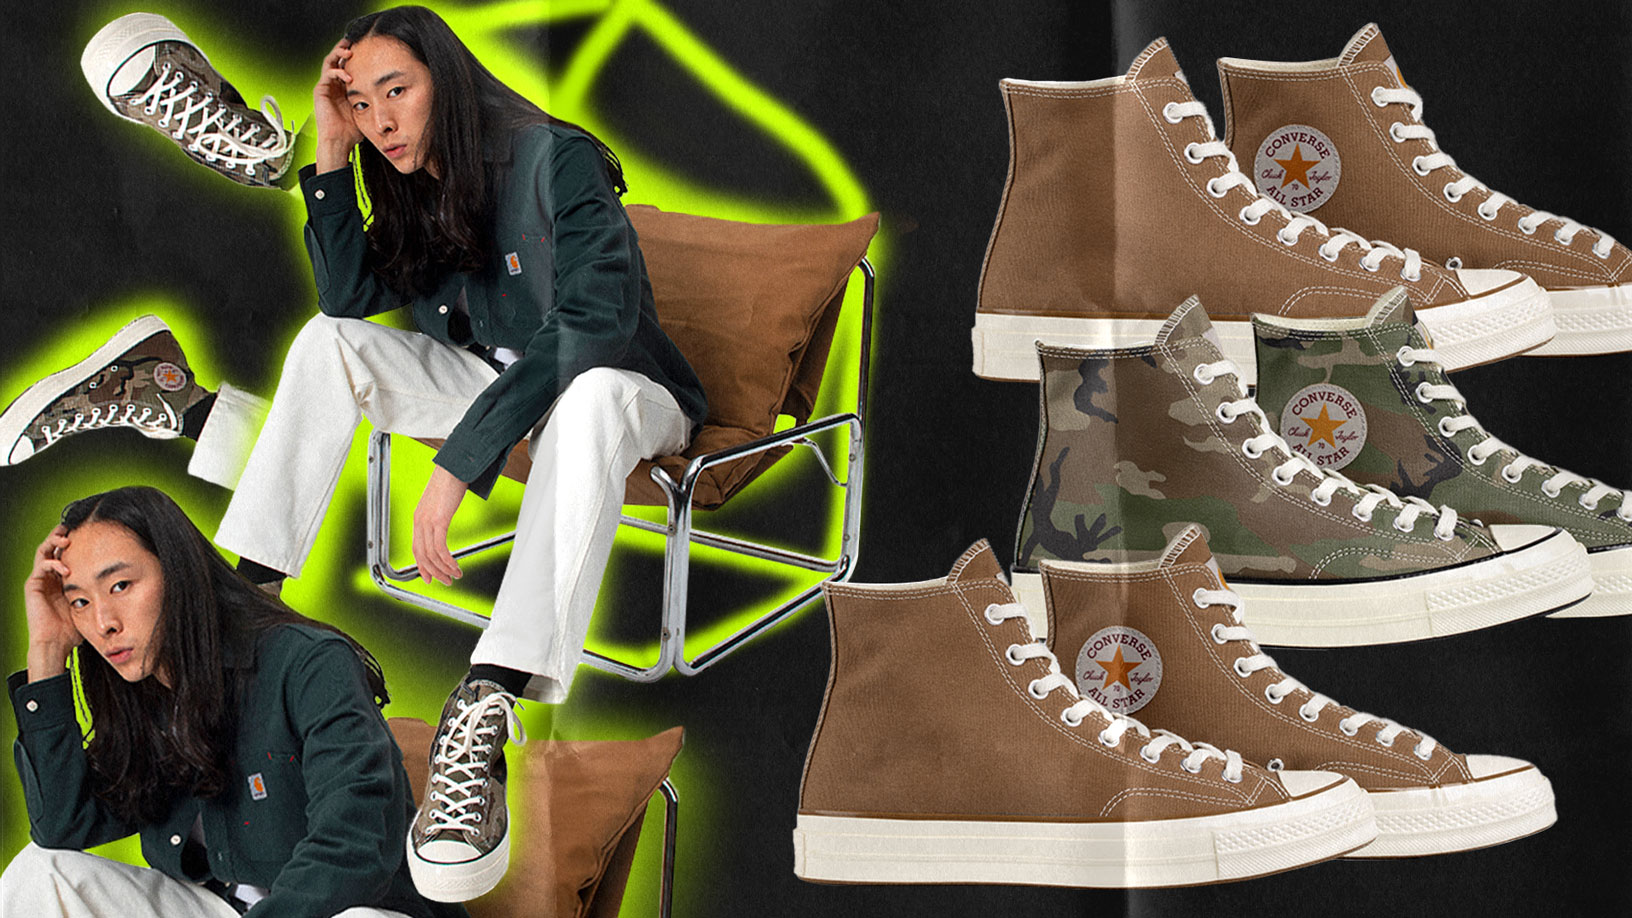 Carhartt Reunites With Converse In This Even Cooler Drop